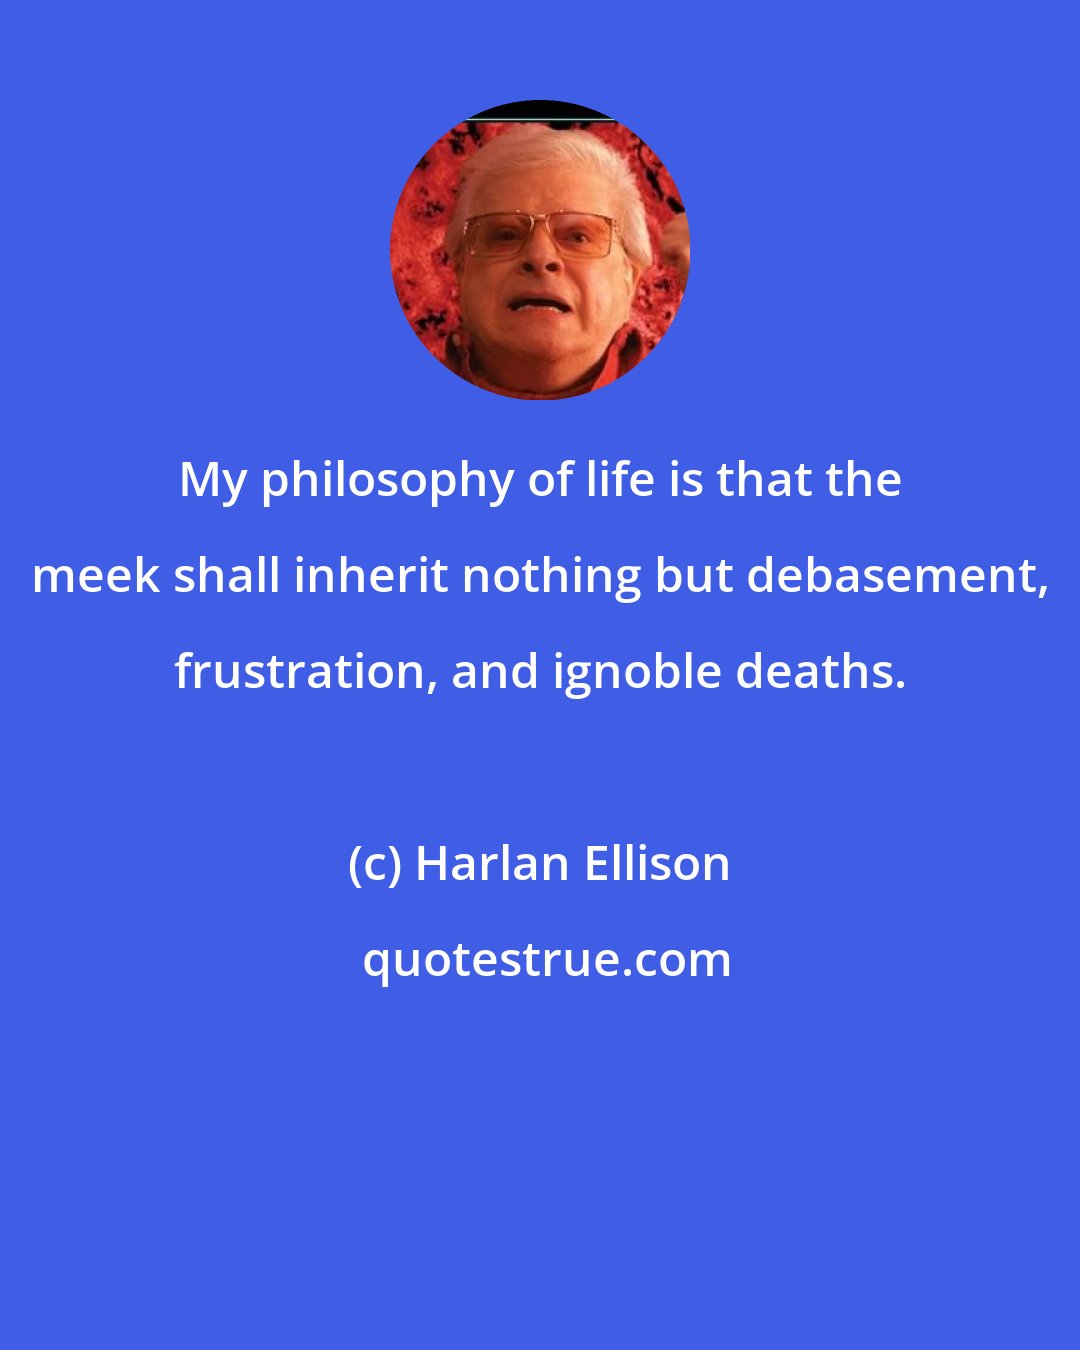 Harlan Ellison: My philosophy of life is that the meek shall inherit nothing but debasement, frustration, and ignoble deaths.